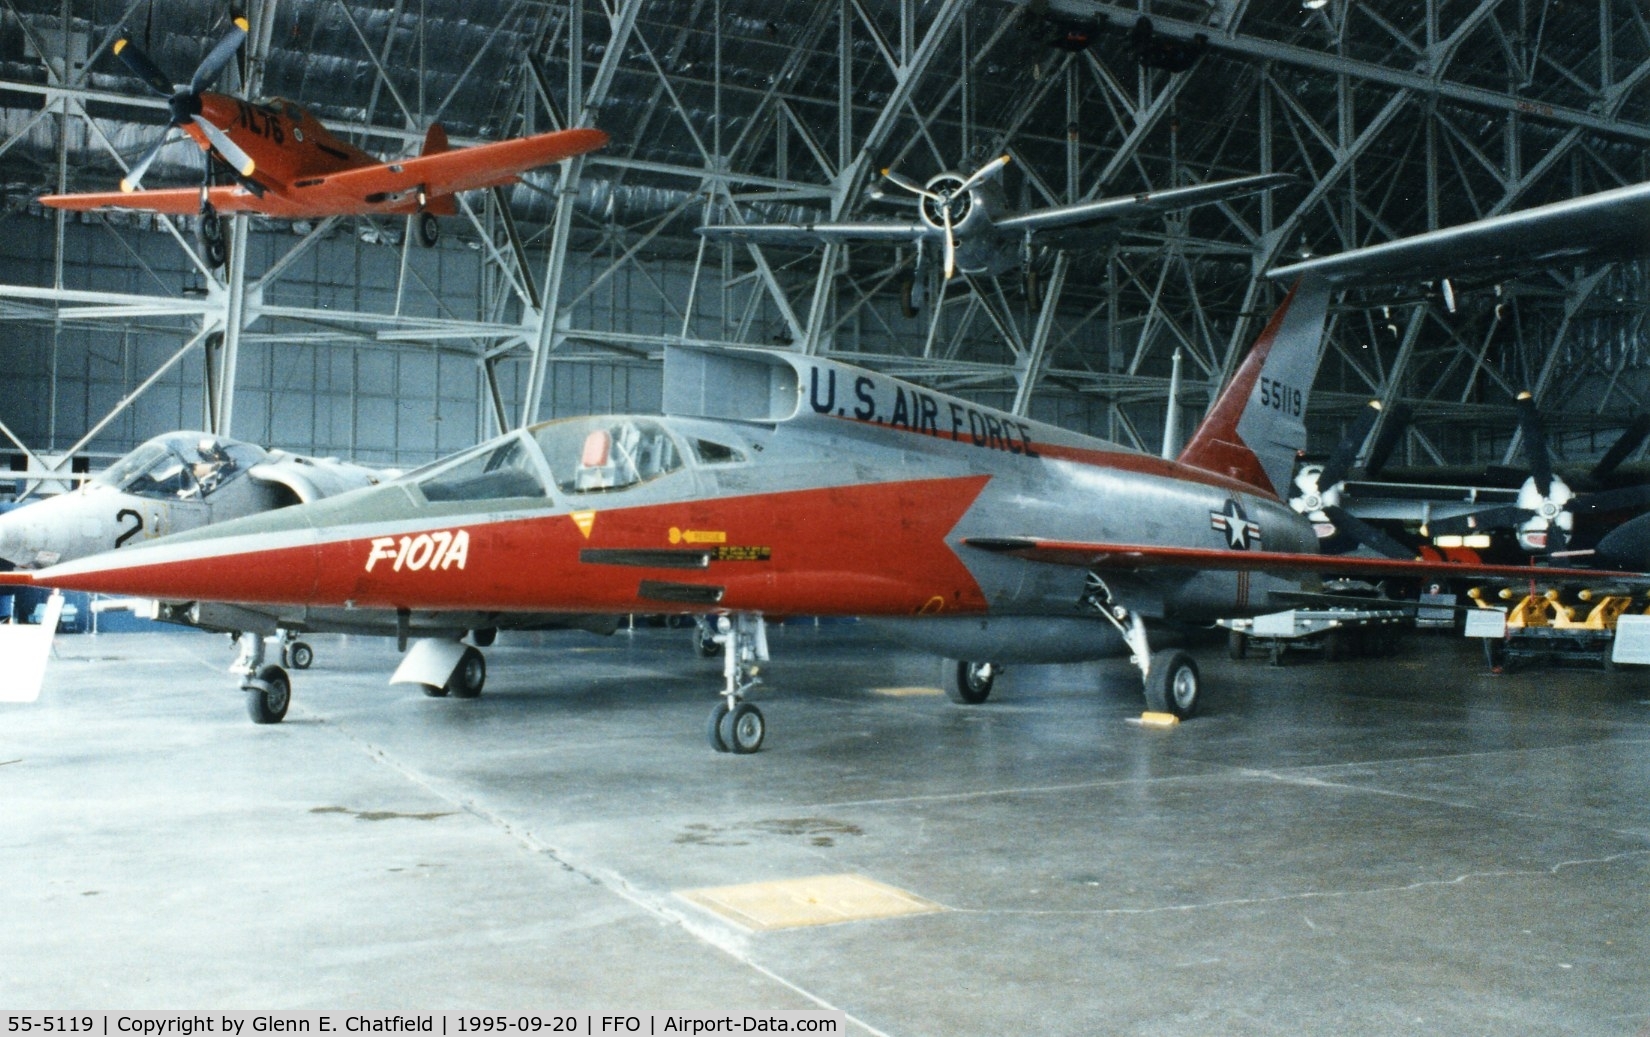 55-5119, 1955 North American F-107A C/N 212-2, YF-107A at the National Museum of the U.S. Air Force